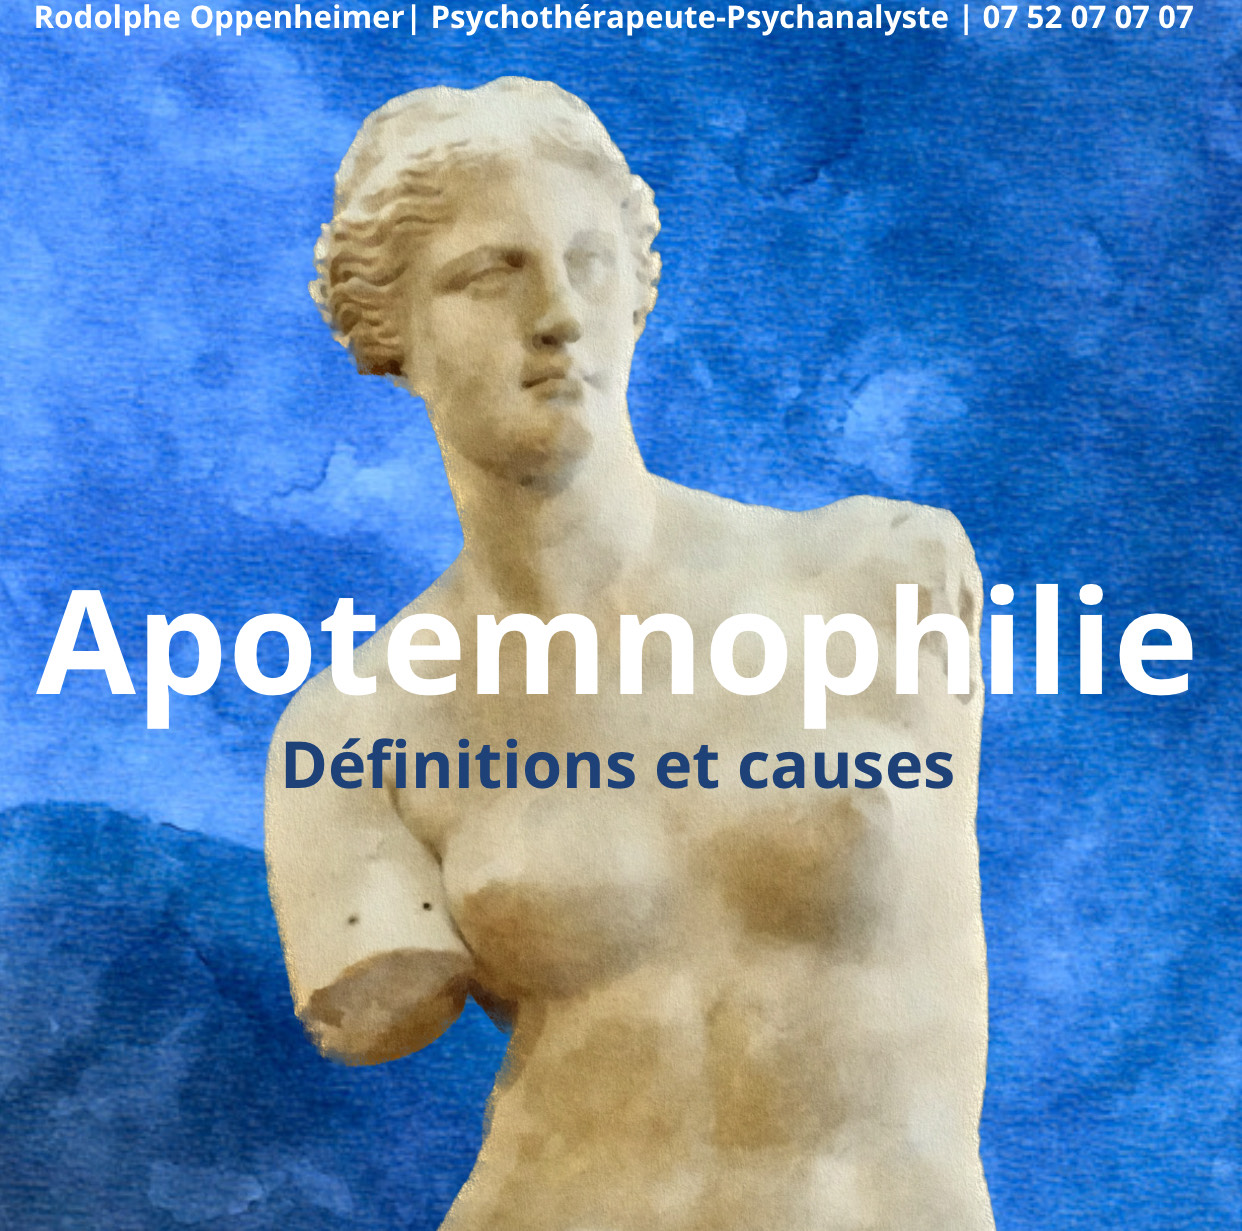 Apotemnophilie